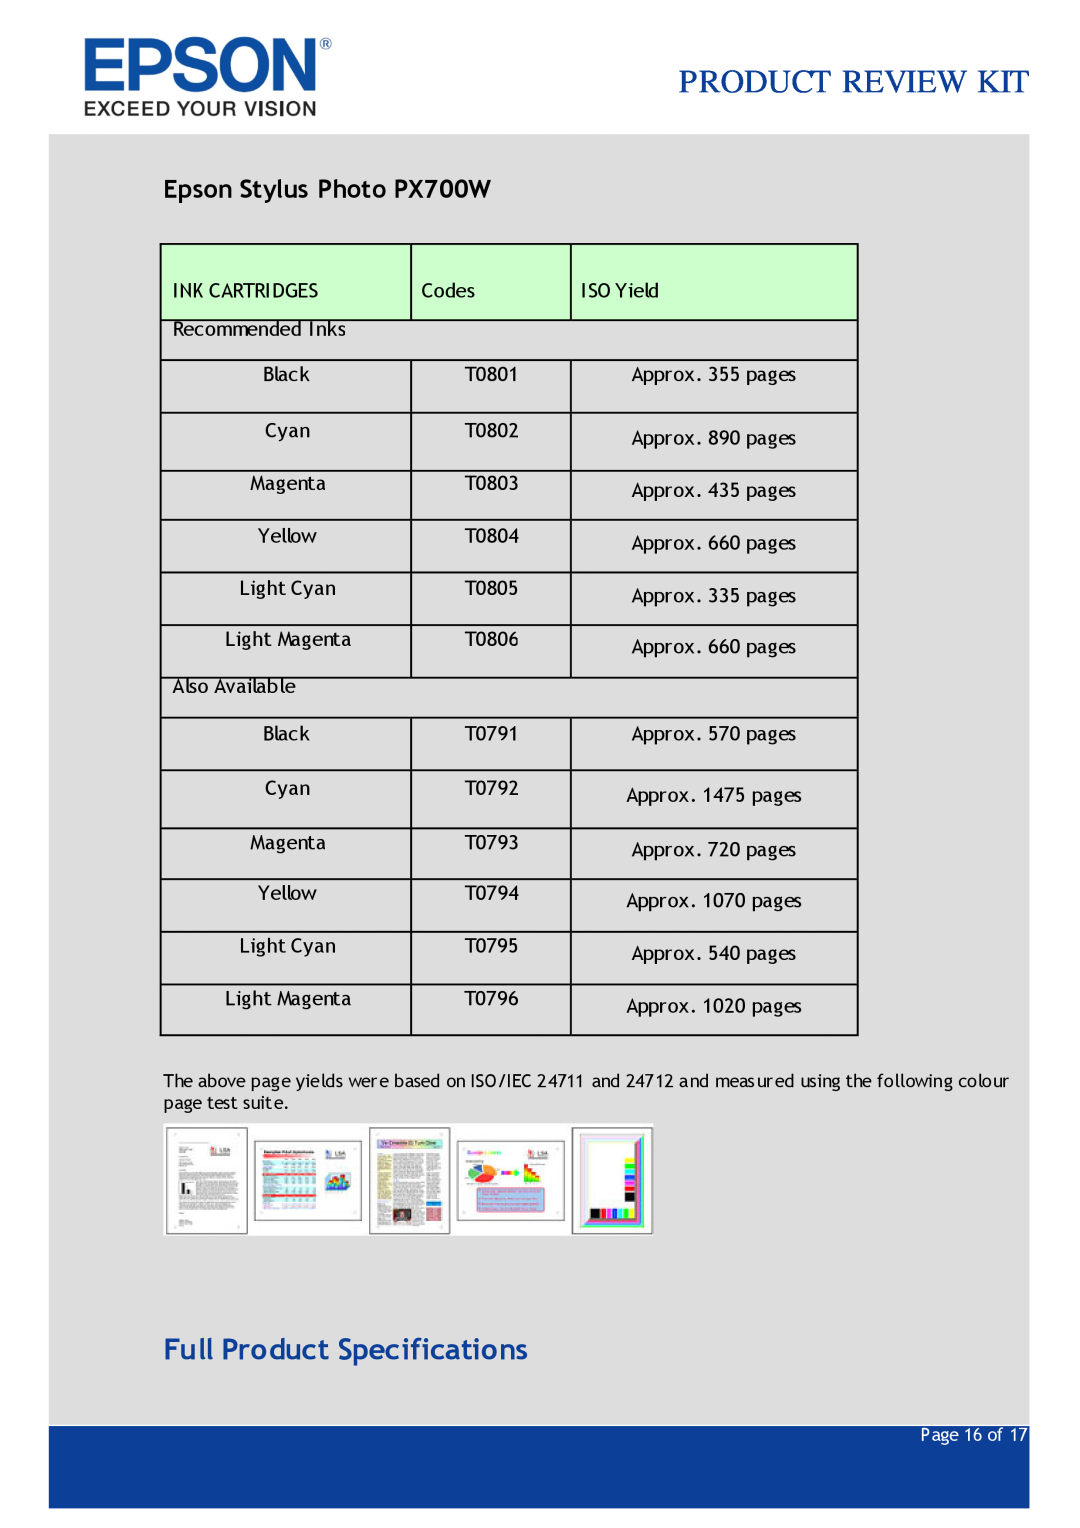 Epson specifications Full Product Specifications, Product Review Kit, Epson Stylus Photo PX700W 